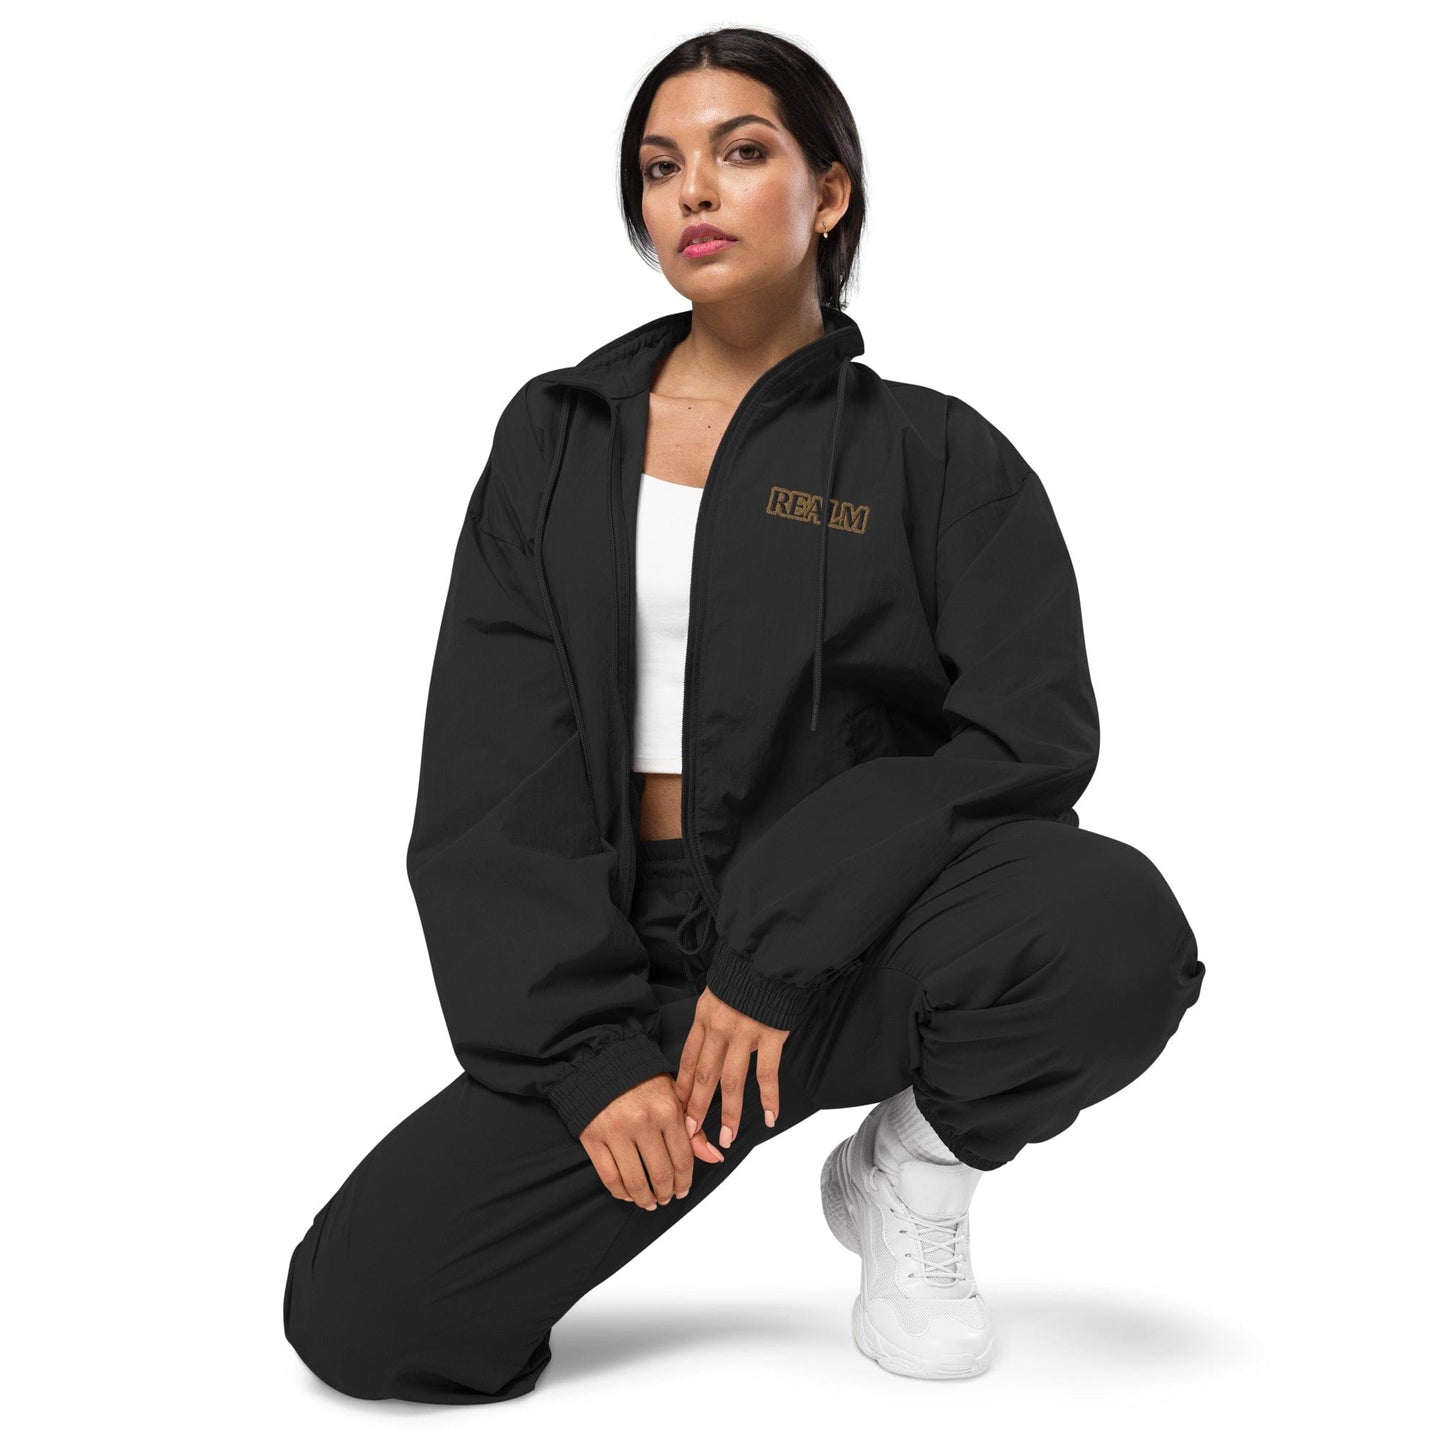 REALM Recycled Tracksuit Jacket | Realm Concept Market - Realm Concept Market